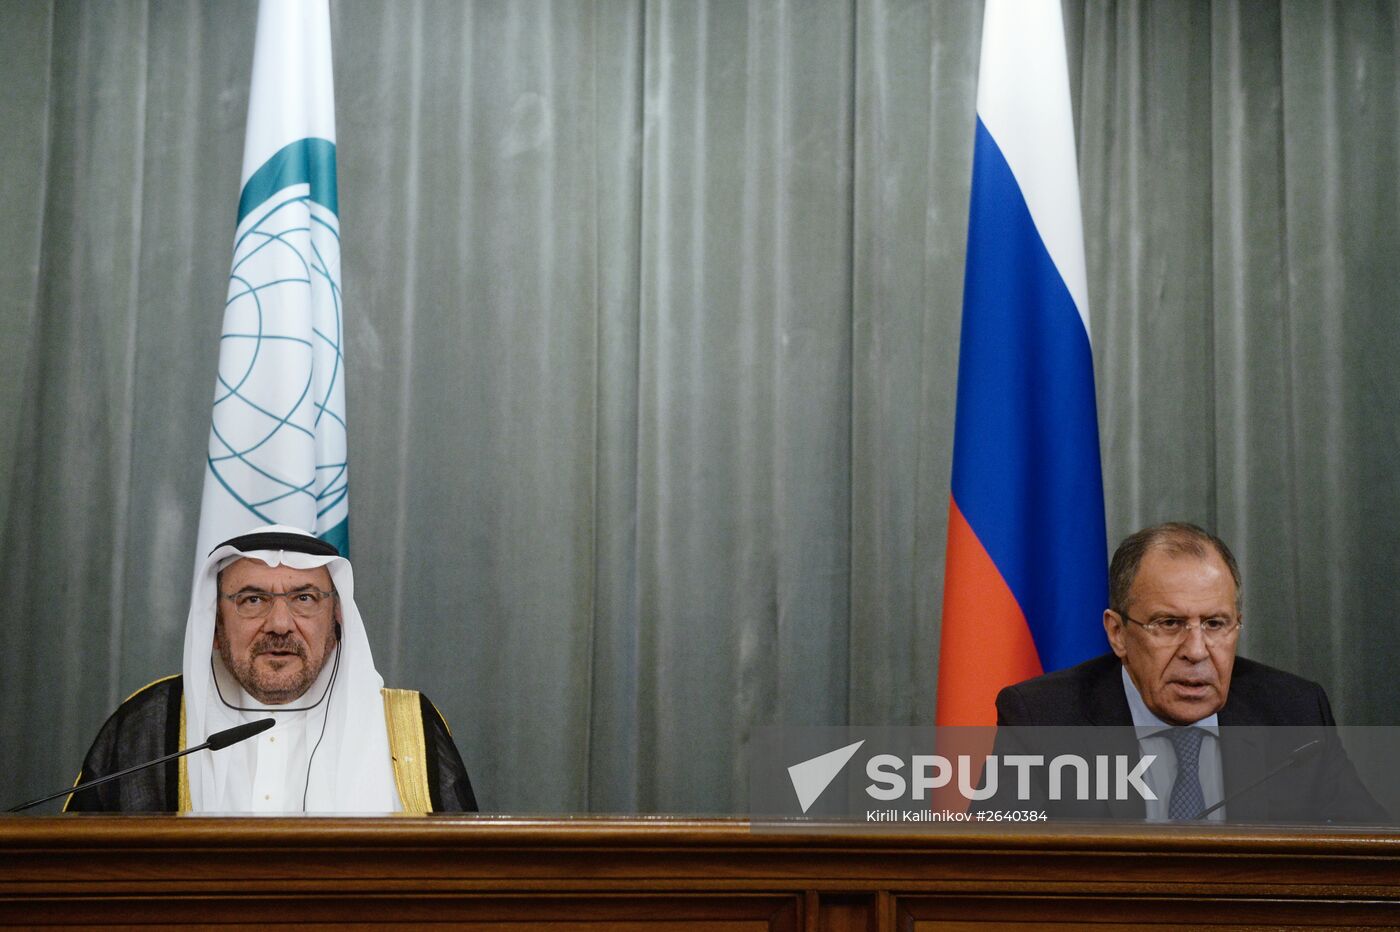 Russian Foreign Minister Sergei Lavrov meets with OIC Secretary-General Iyad bin Amin Madani